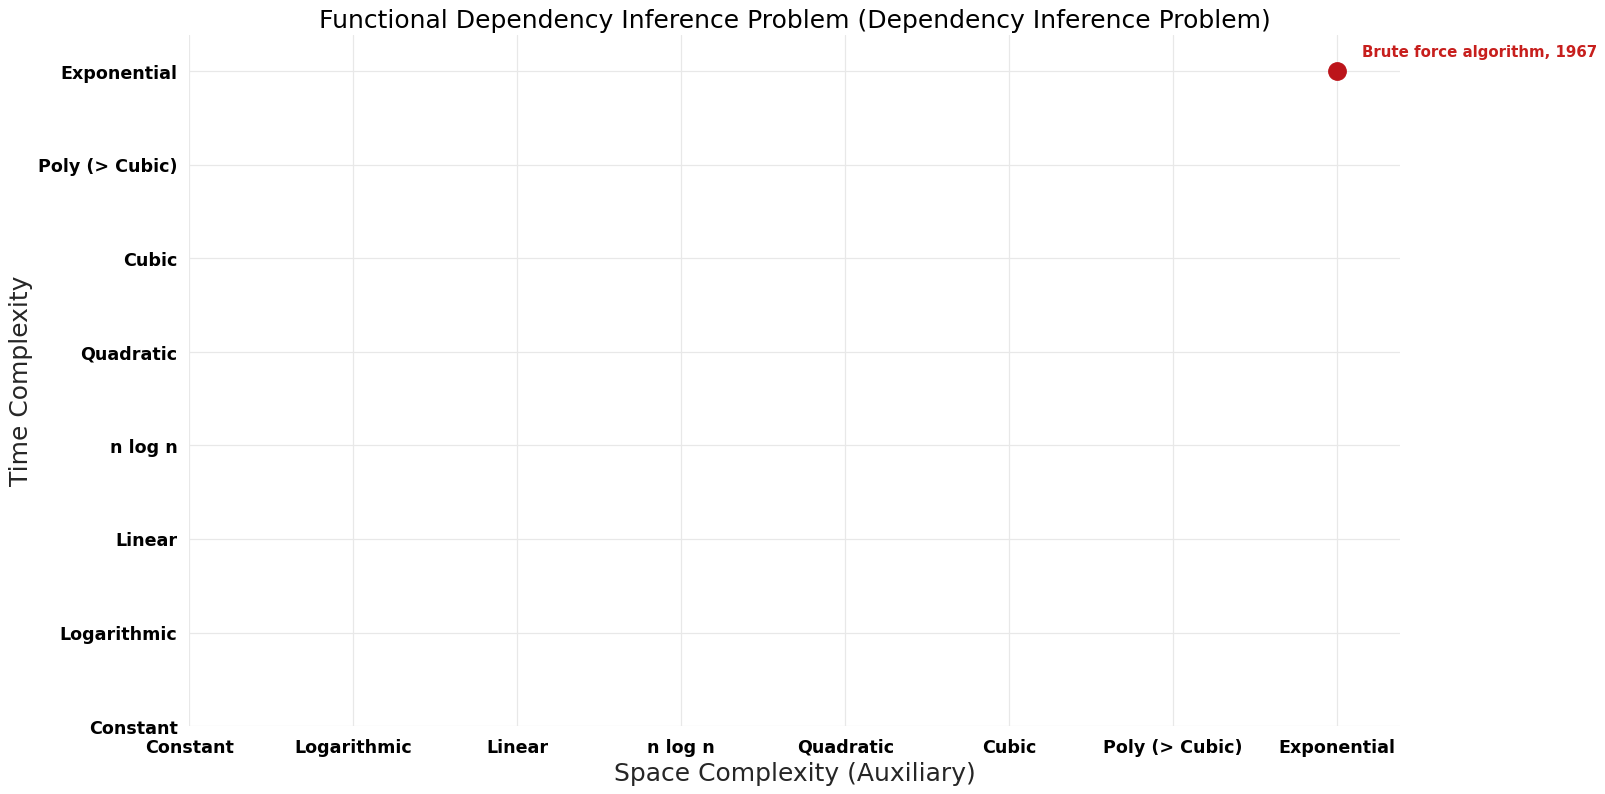 File:Dependency Inference Problem - Functional Dependency Inference Problem - Pareto Frontier.png